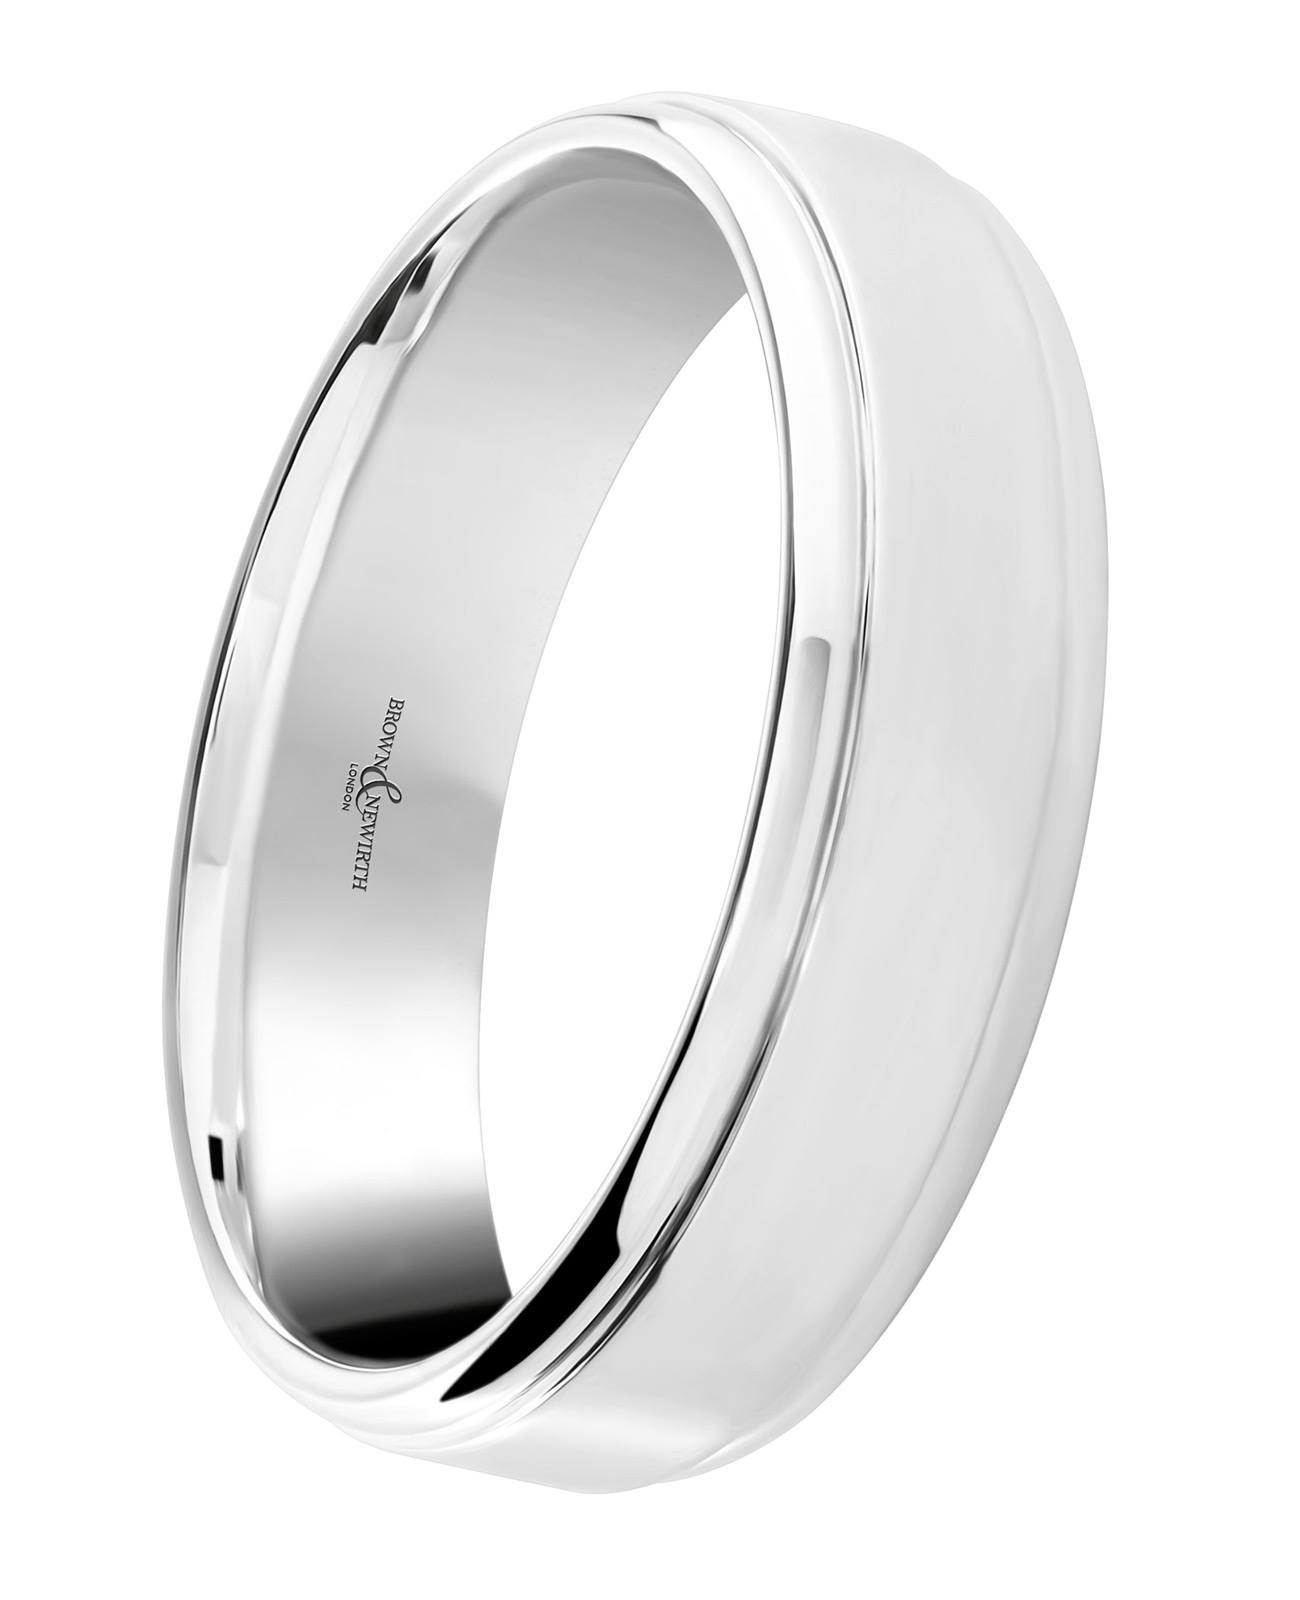 9ct White Gold Polished Effect With Two Lines and Rolled Edges Gets Wedding Band